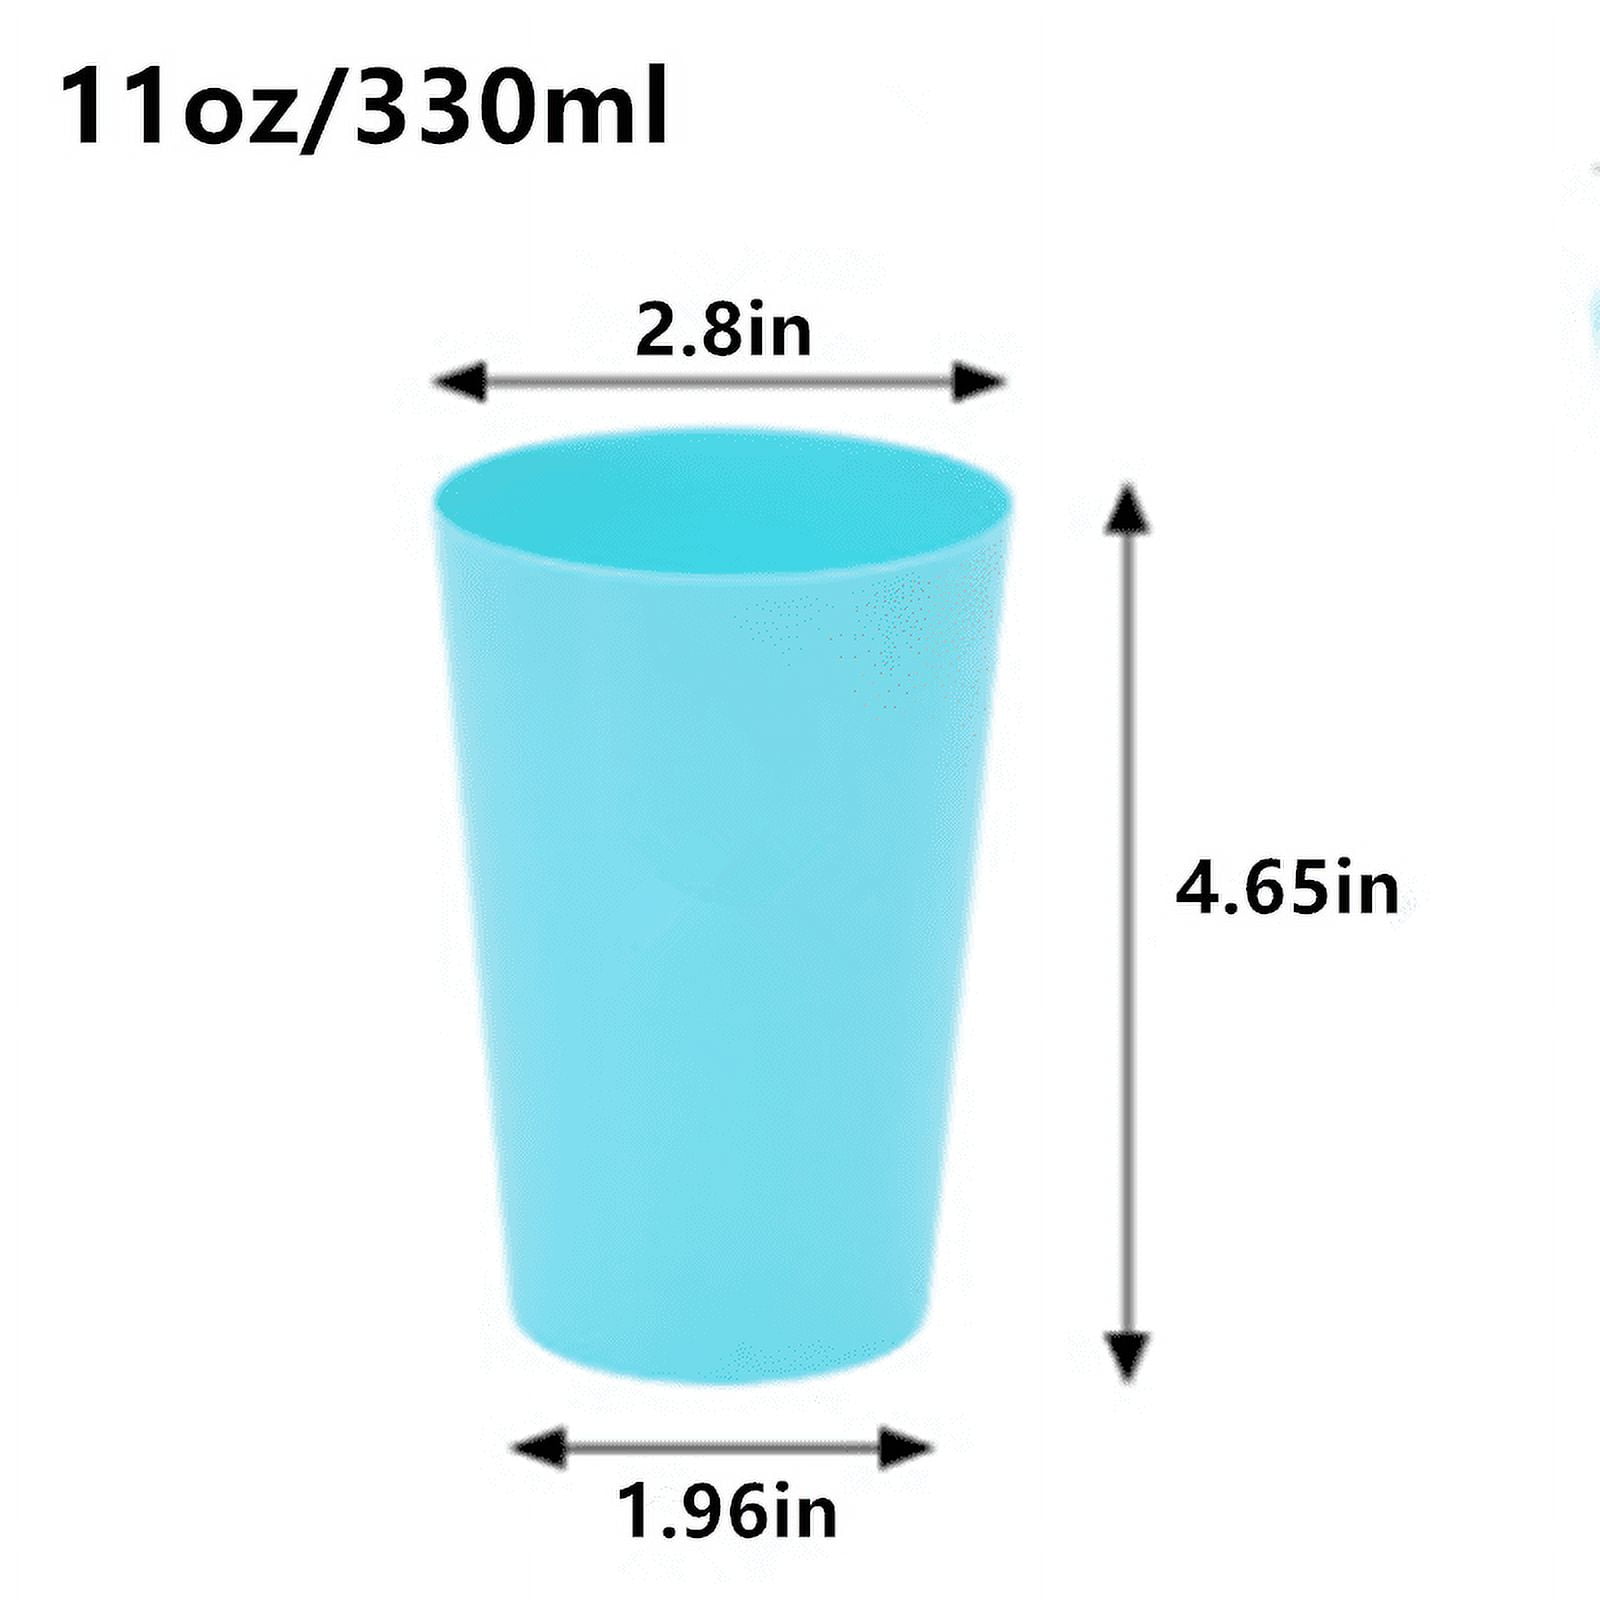 Casewin Plastic Glasses 530ml Stackable Set of 12, Dishwasher Safe Tumblers  Cups Plastic Drinking Glasses, Water Juice Cocktail Glasses Camping